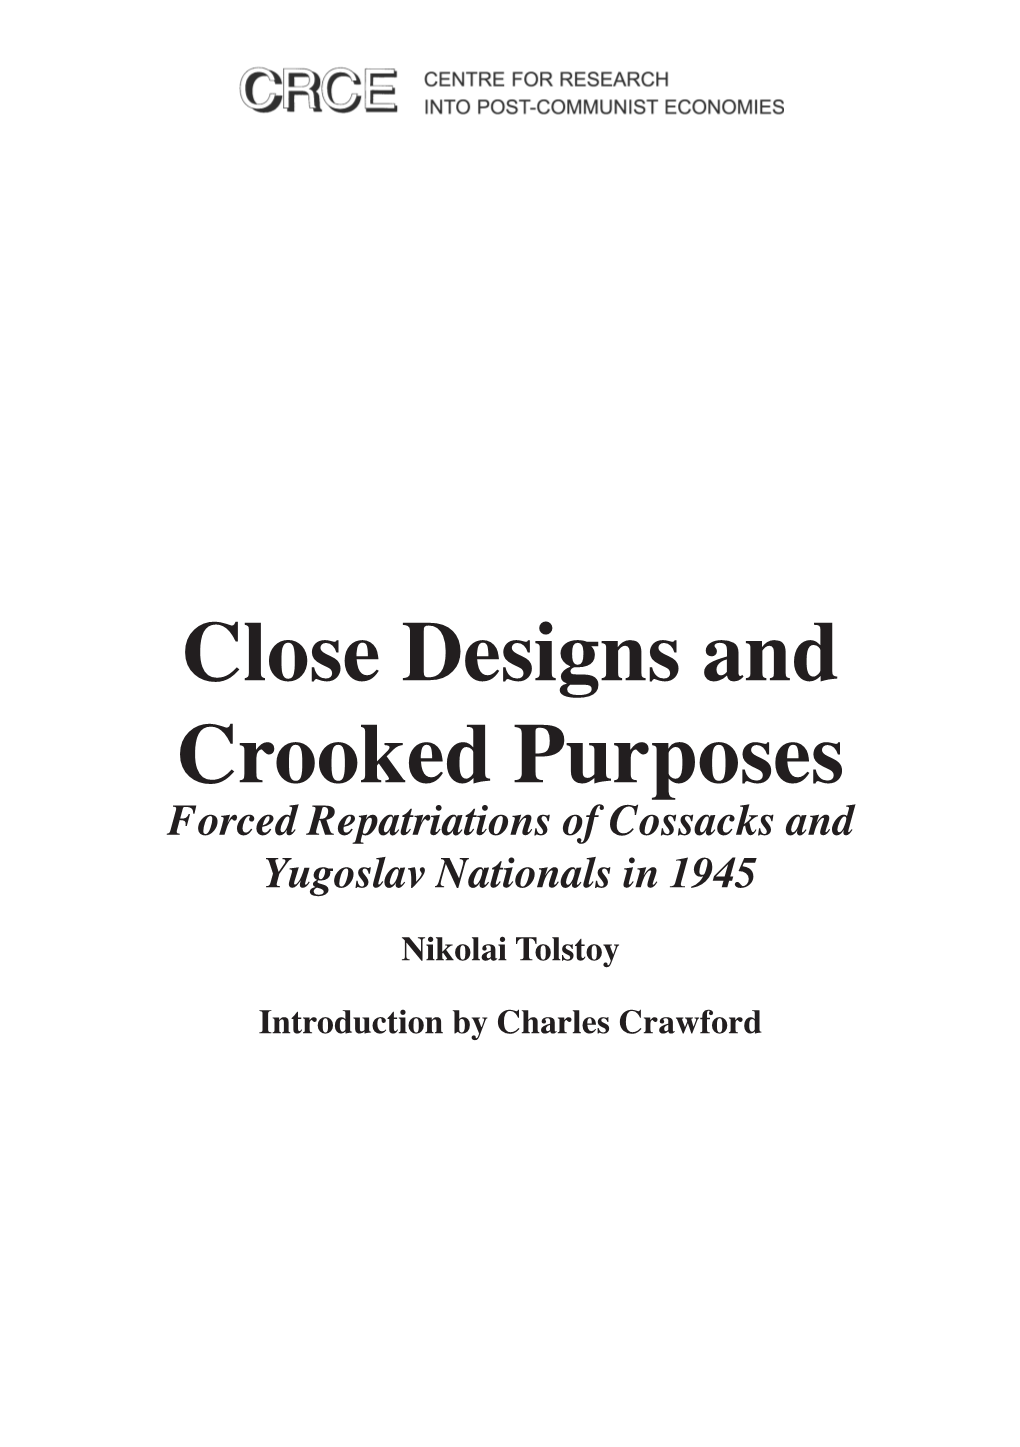 Close Designs and Crooked Purposes Forced Repatriations of Cossacks and Yugoslav Nationals in 1945